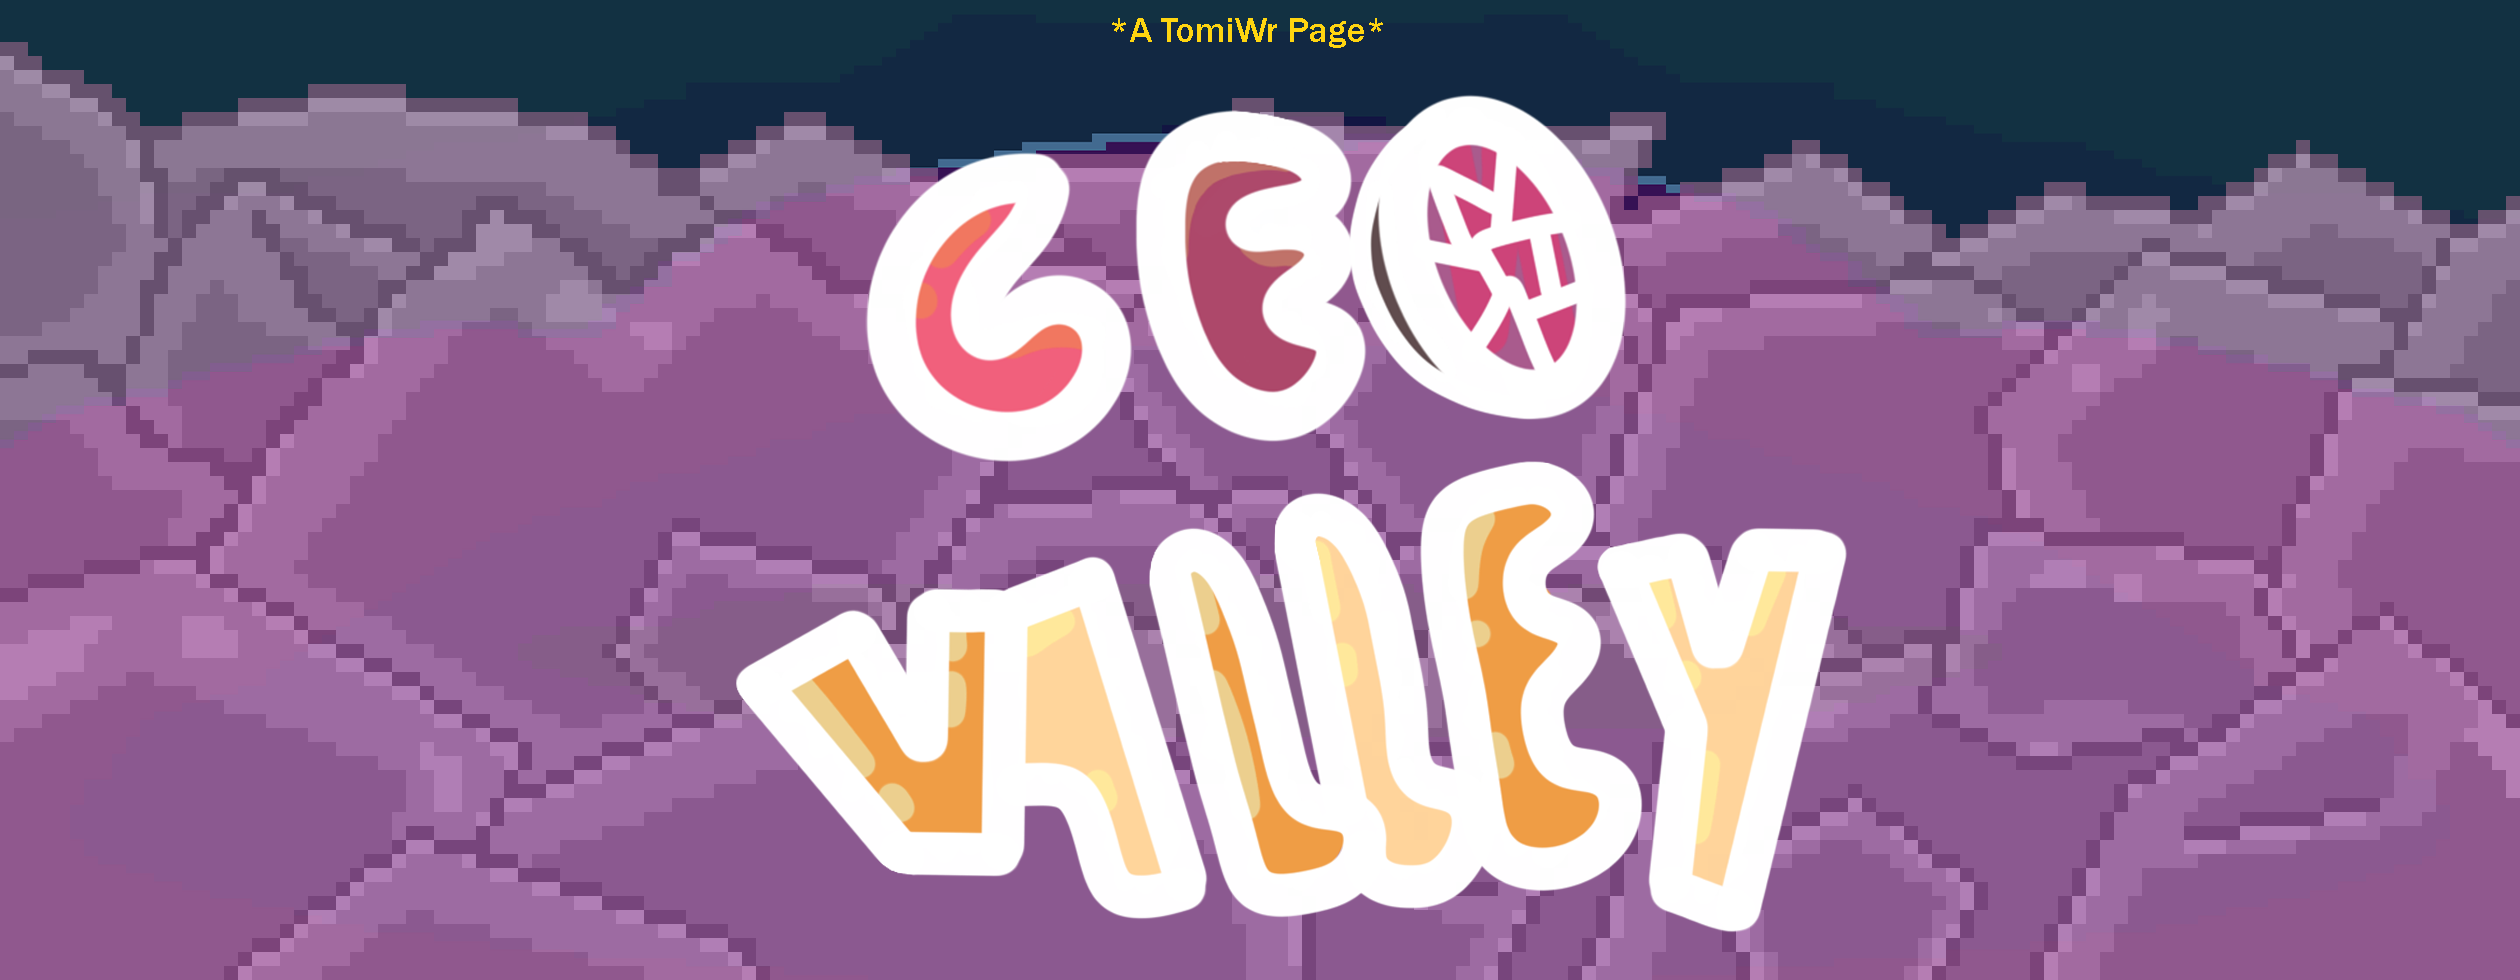 GEO VALLEY |Prologue|